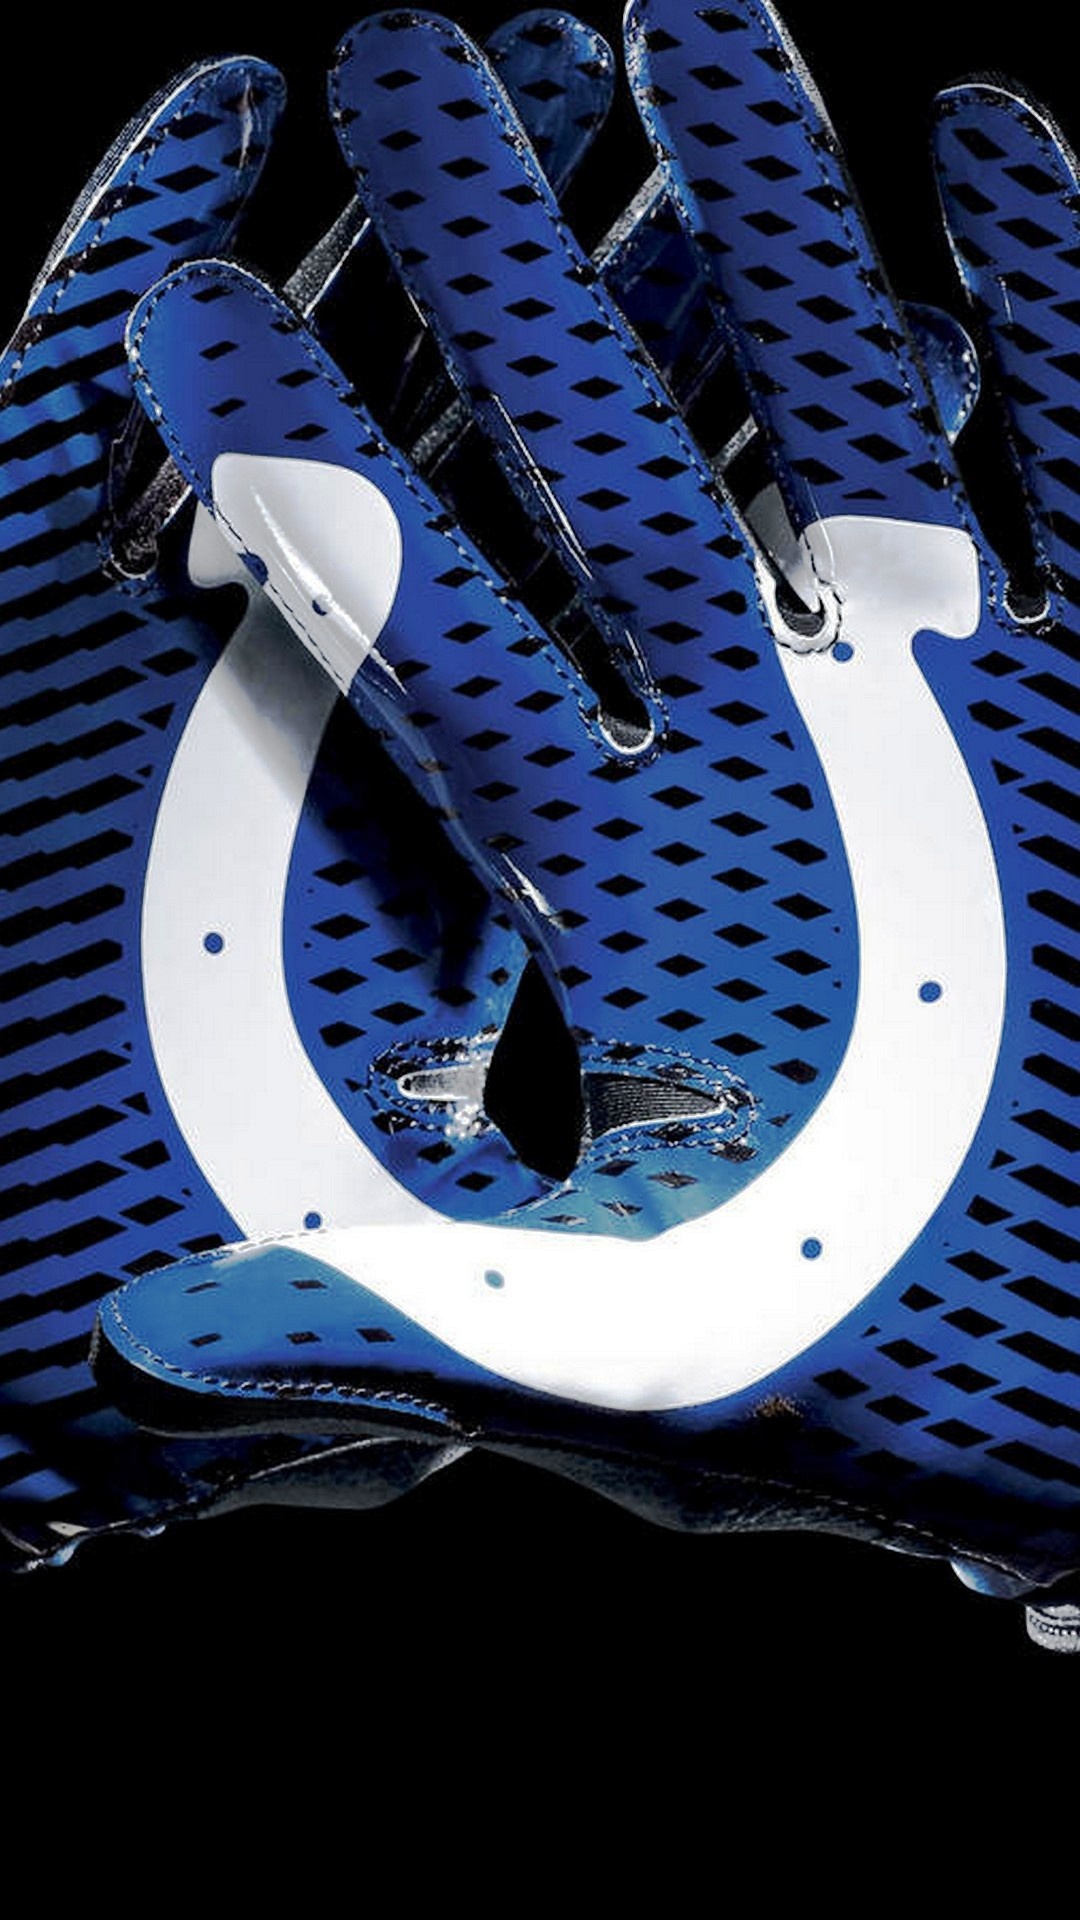 Screensaver iPhone, Indianapolis Colts, NFL iPhone wallpaper, 2022, 1080x1920 Full HD Phone